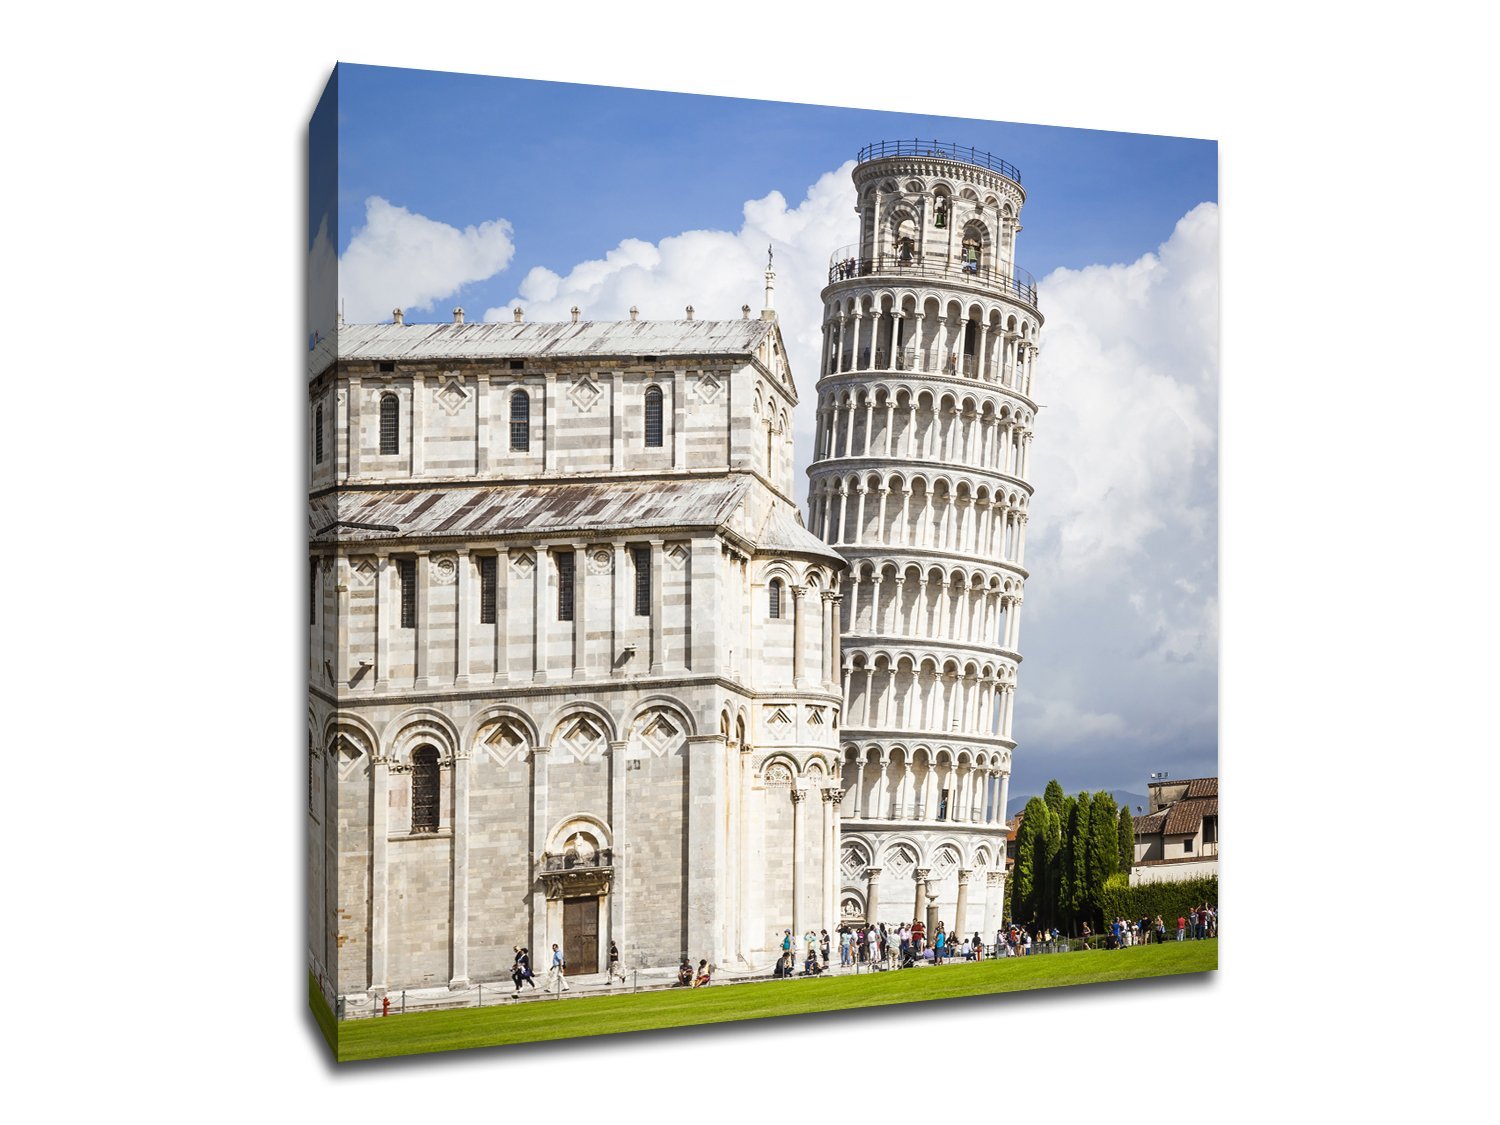 Leaning Tower of Pisa Italy Global Landmarks Canvas Wall Art Drop shipping 